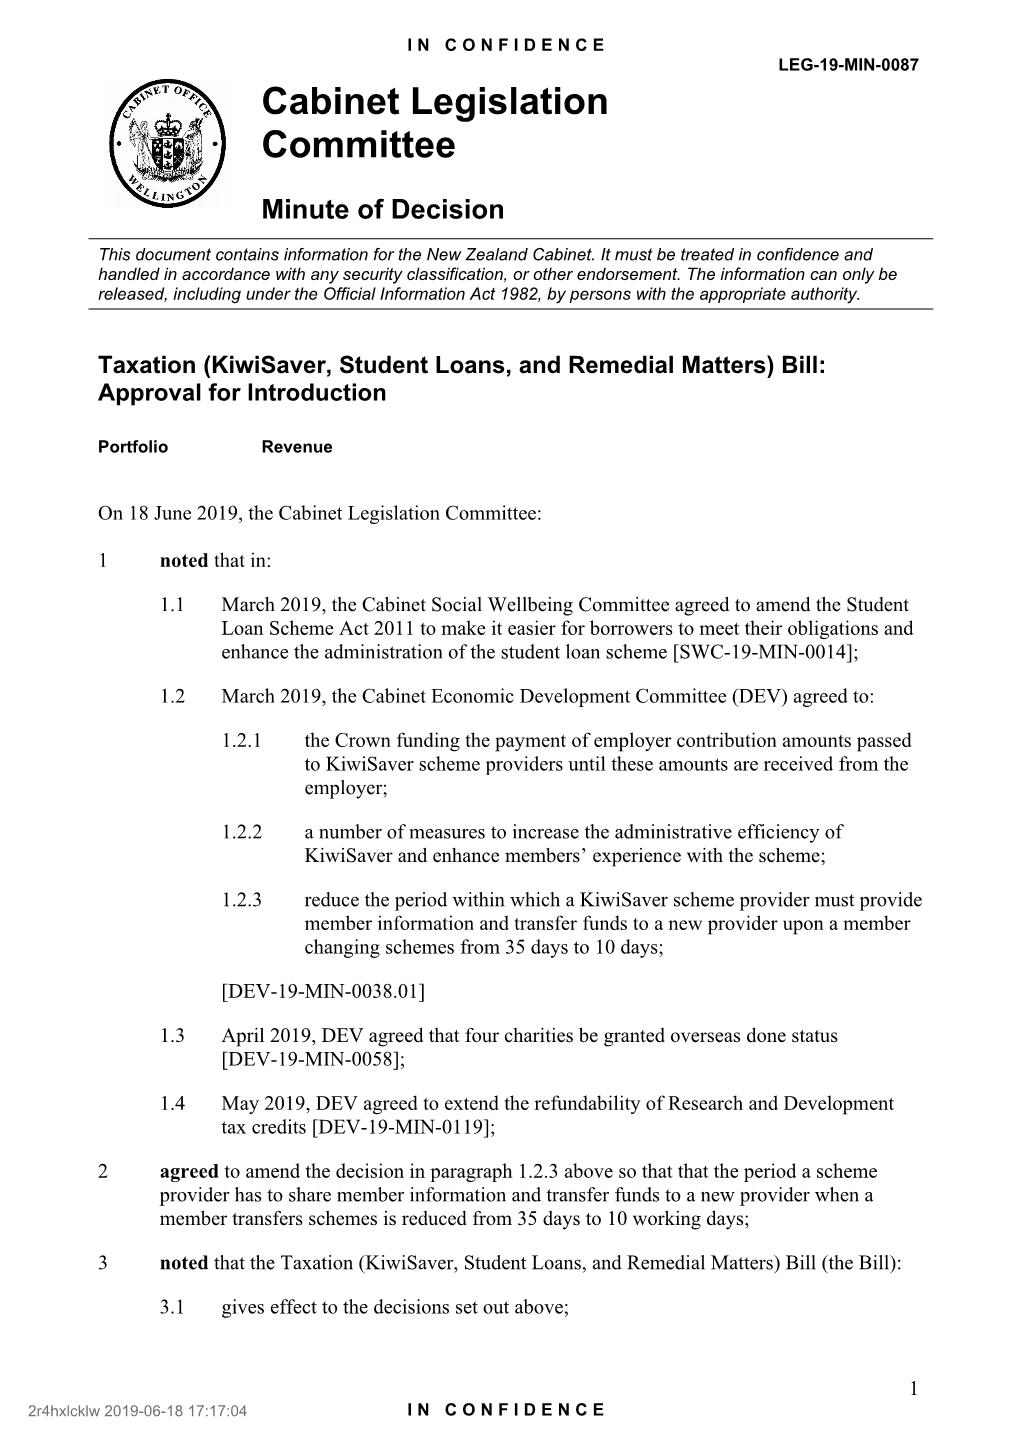 (Kiwisaver, Student Loans, and Remedial Matters) Bill: Approval for Introduction